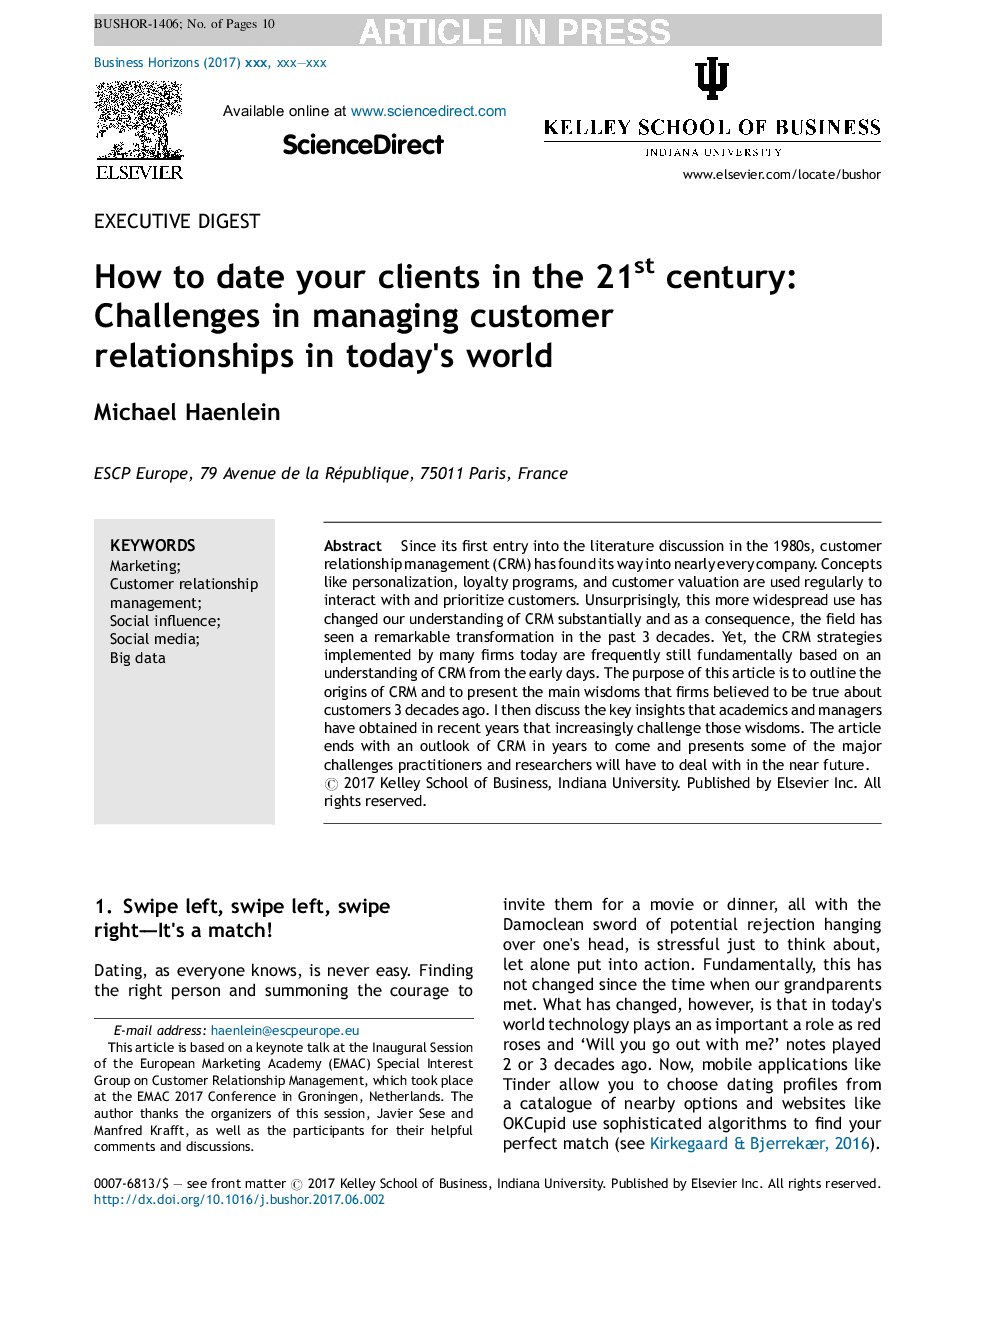 How to date your clients in the 21st century: Challenges in managing customer relationships in today's world